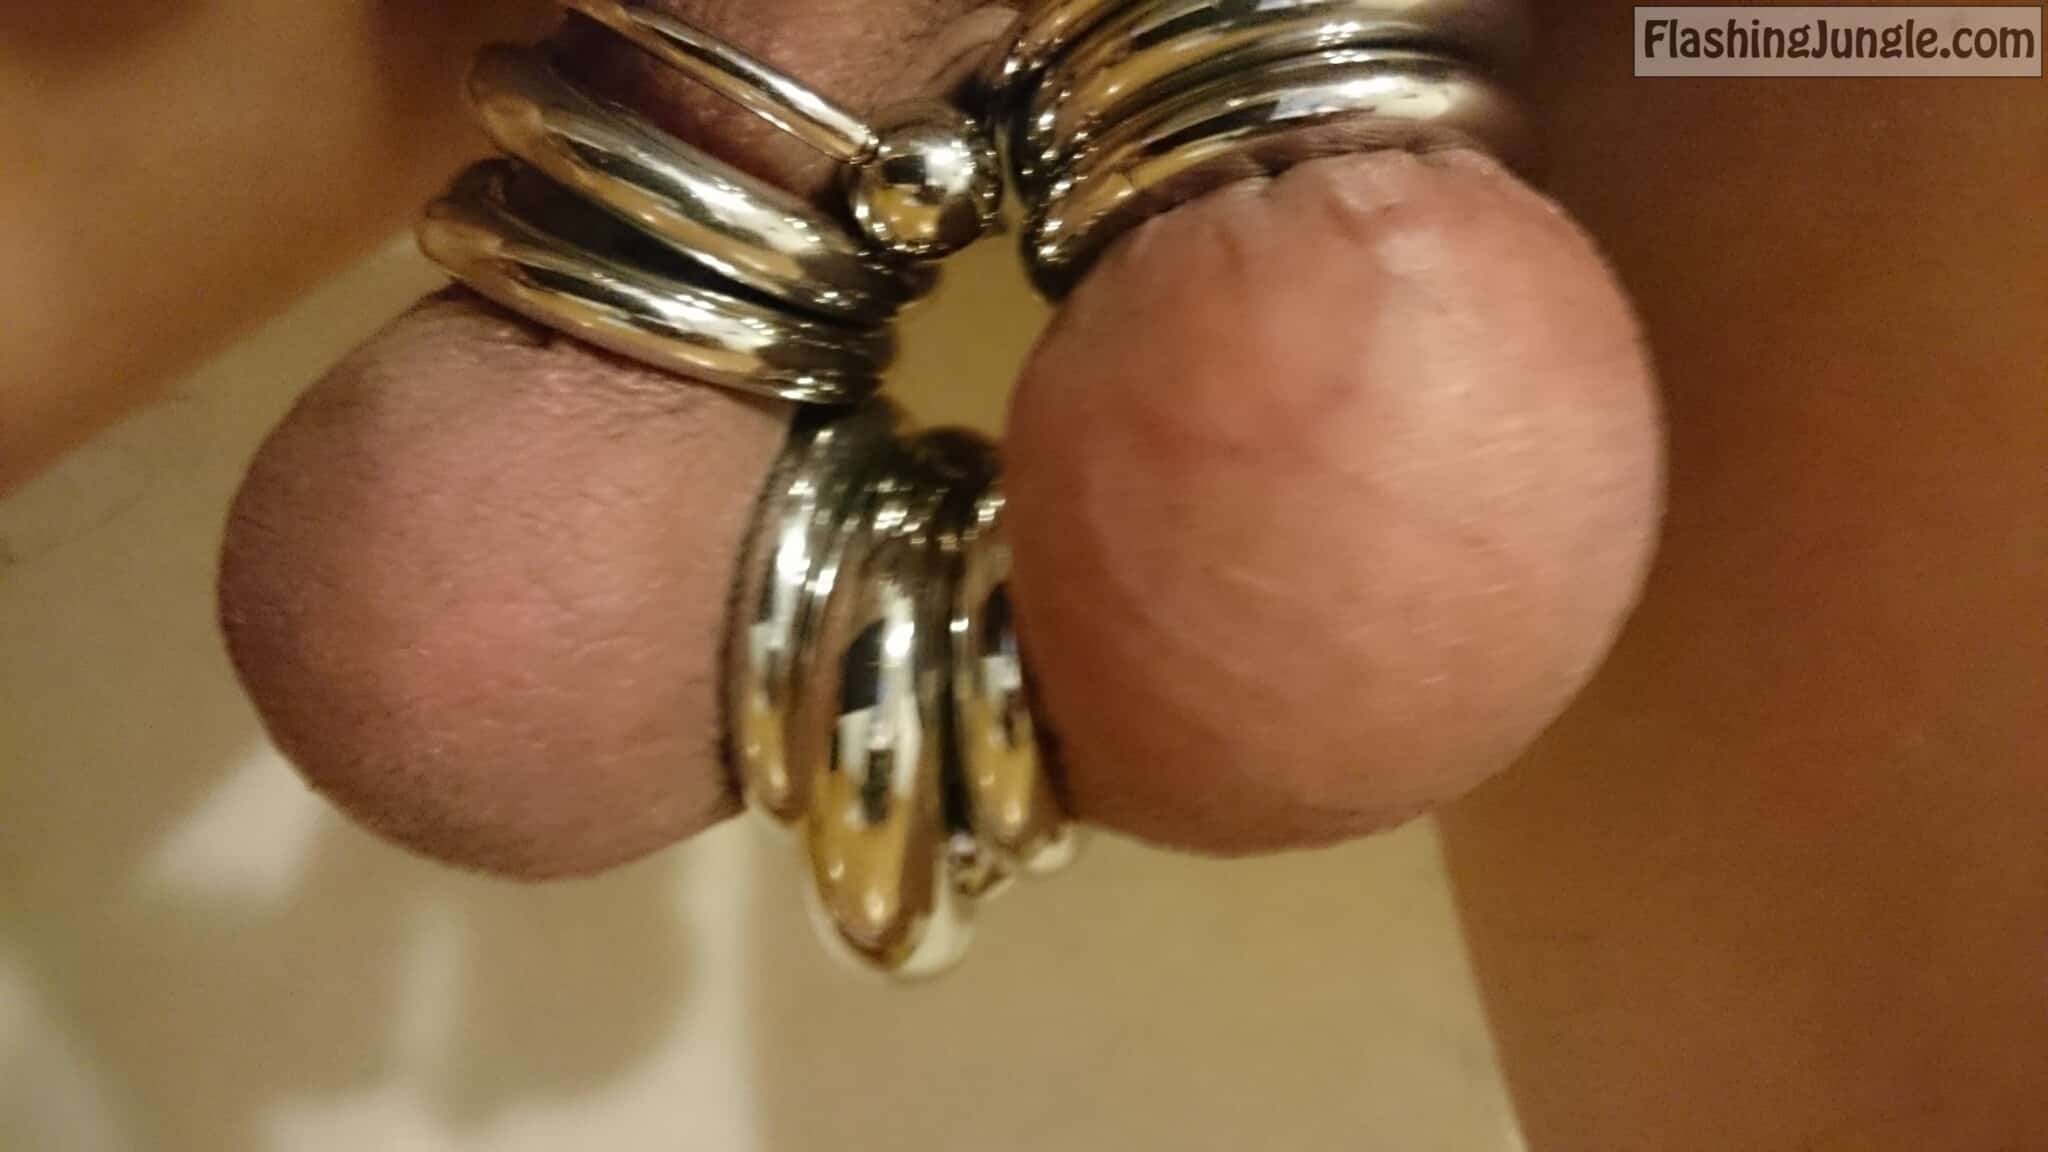 A transscrotal piercing is a body piercing that travels through the scrotum...